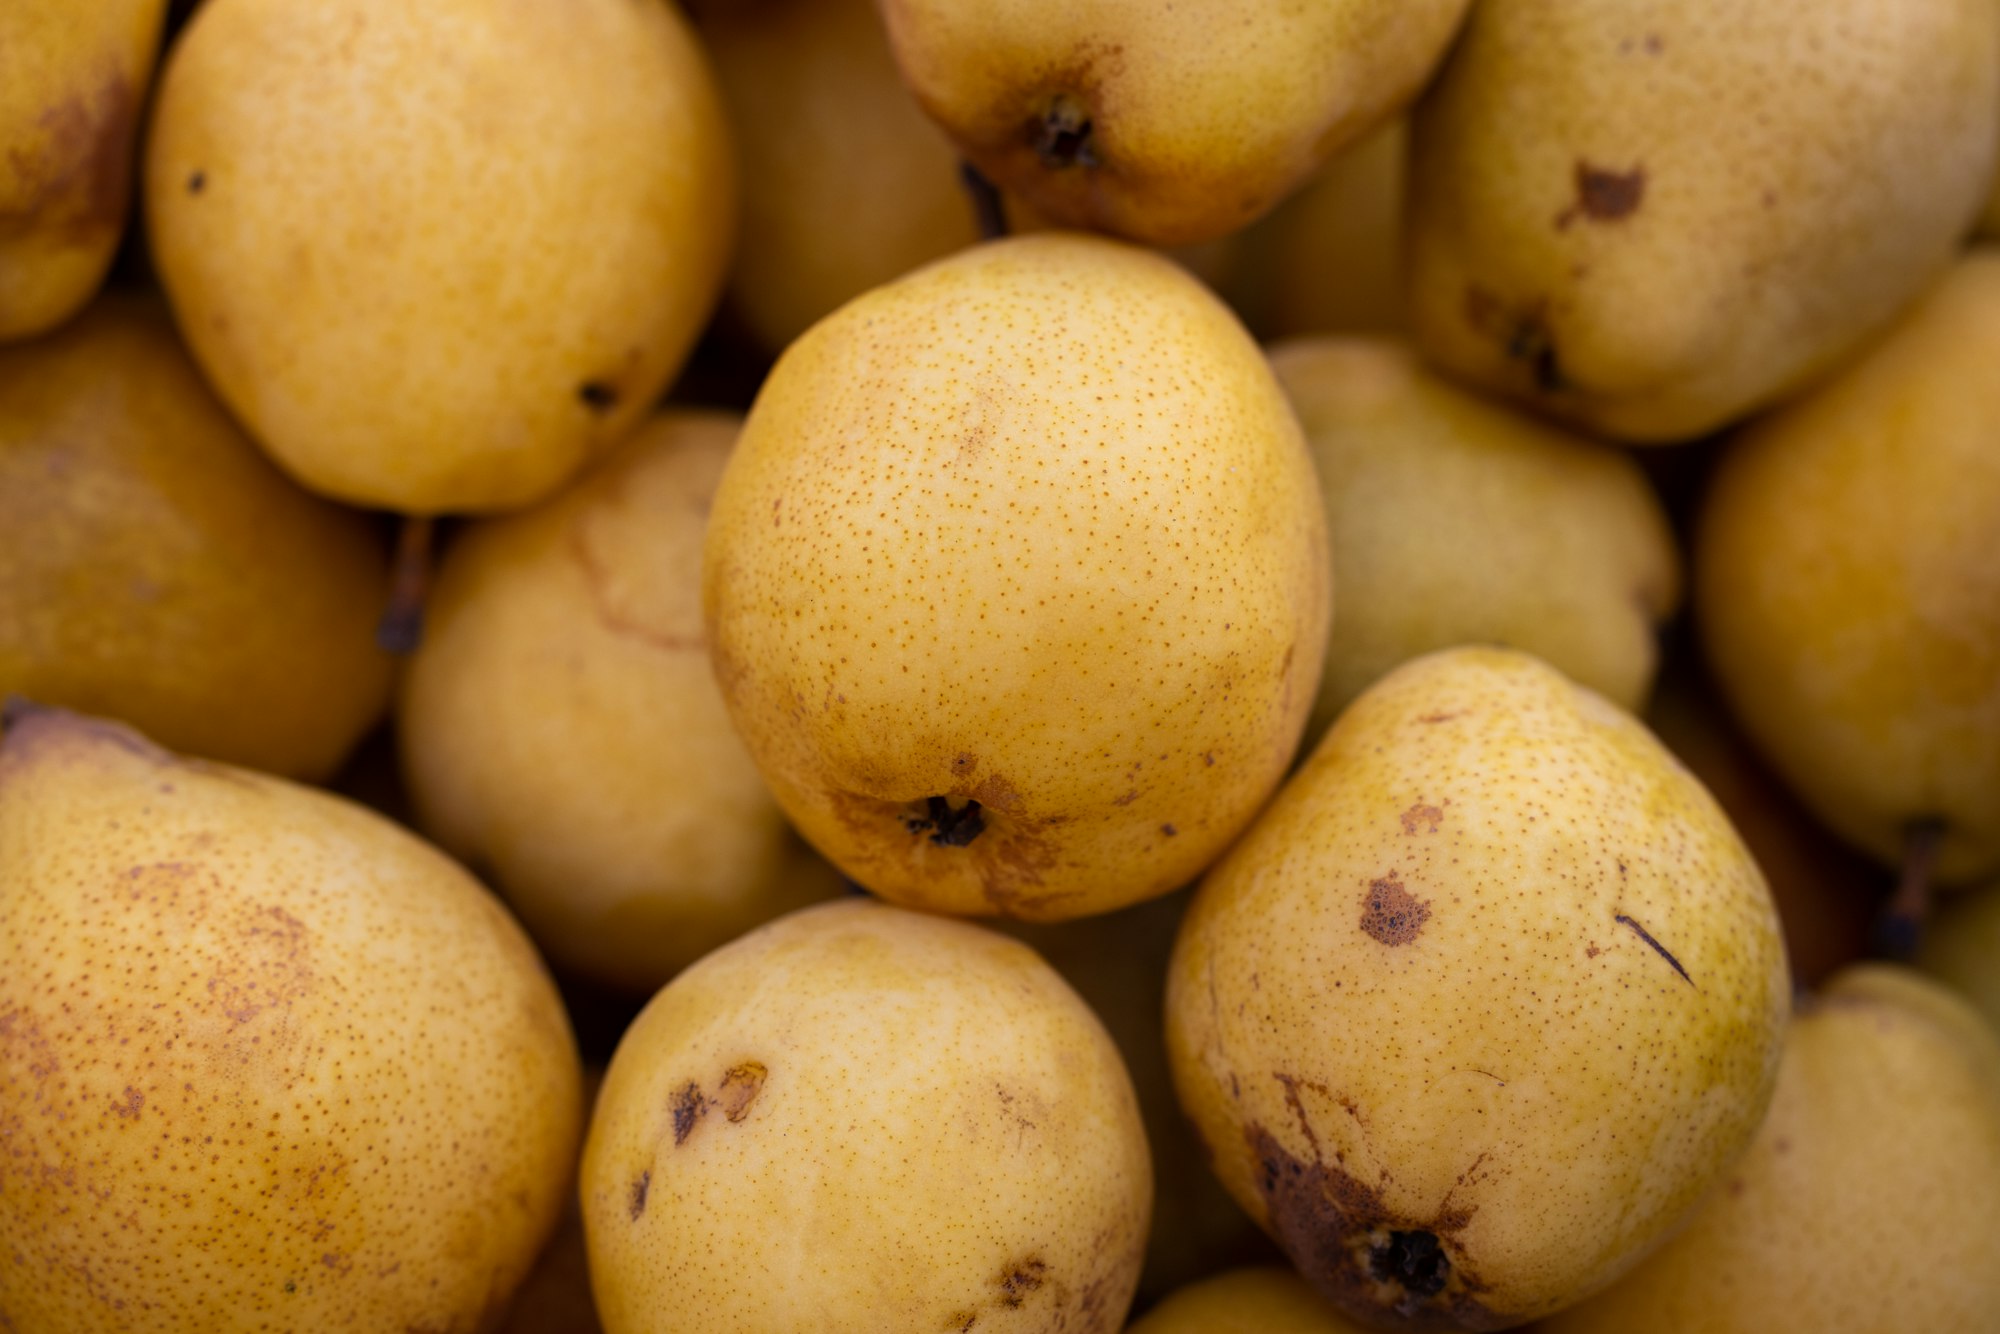 a pile of yellow pears with brown spots